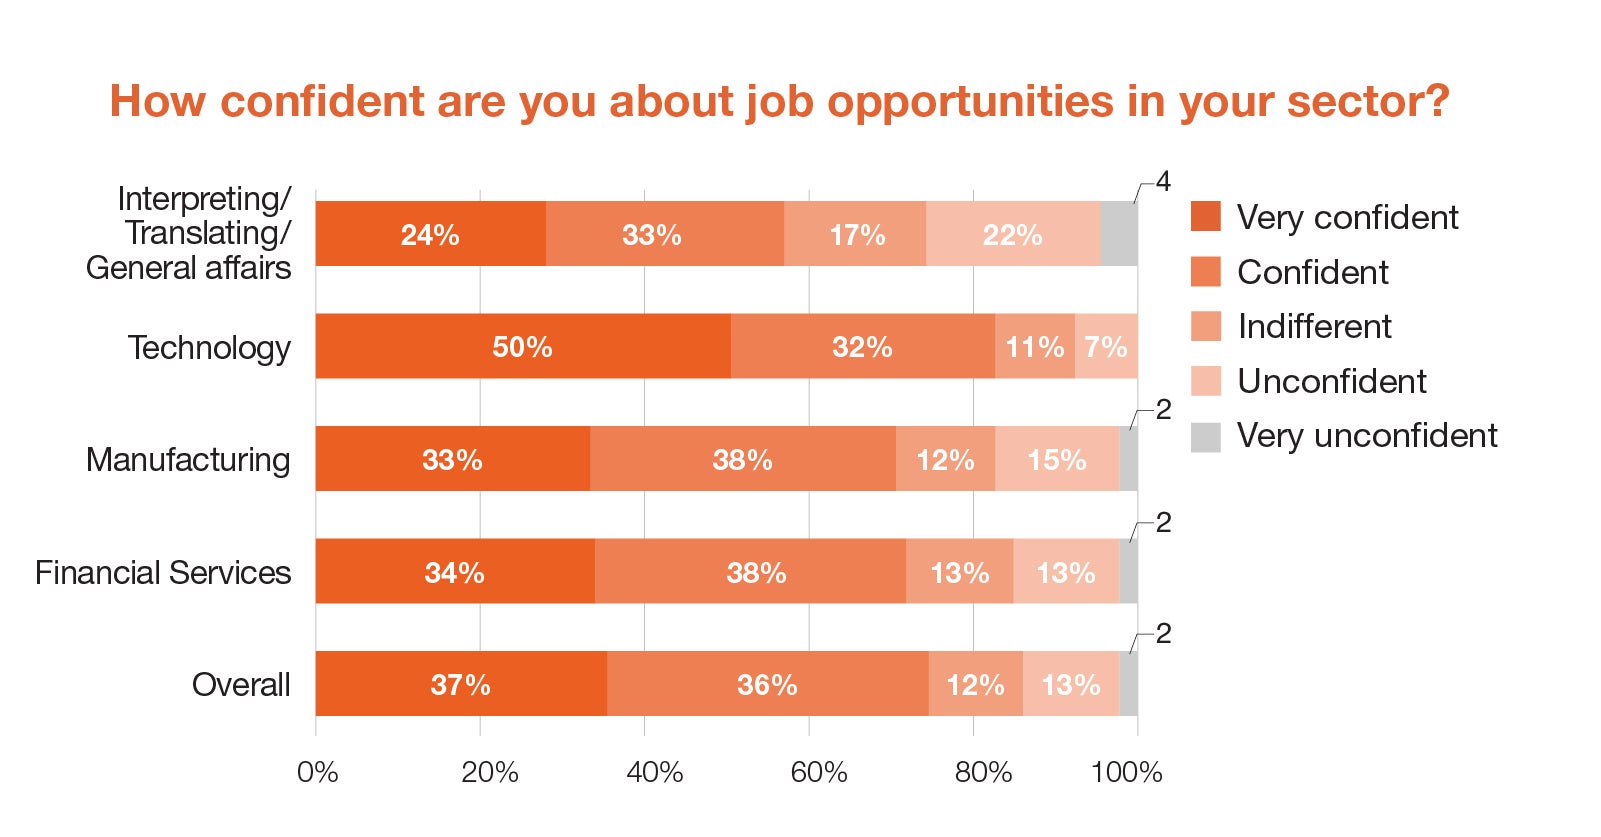 How confident are you about job opportunities in your sector?